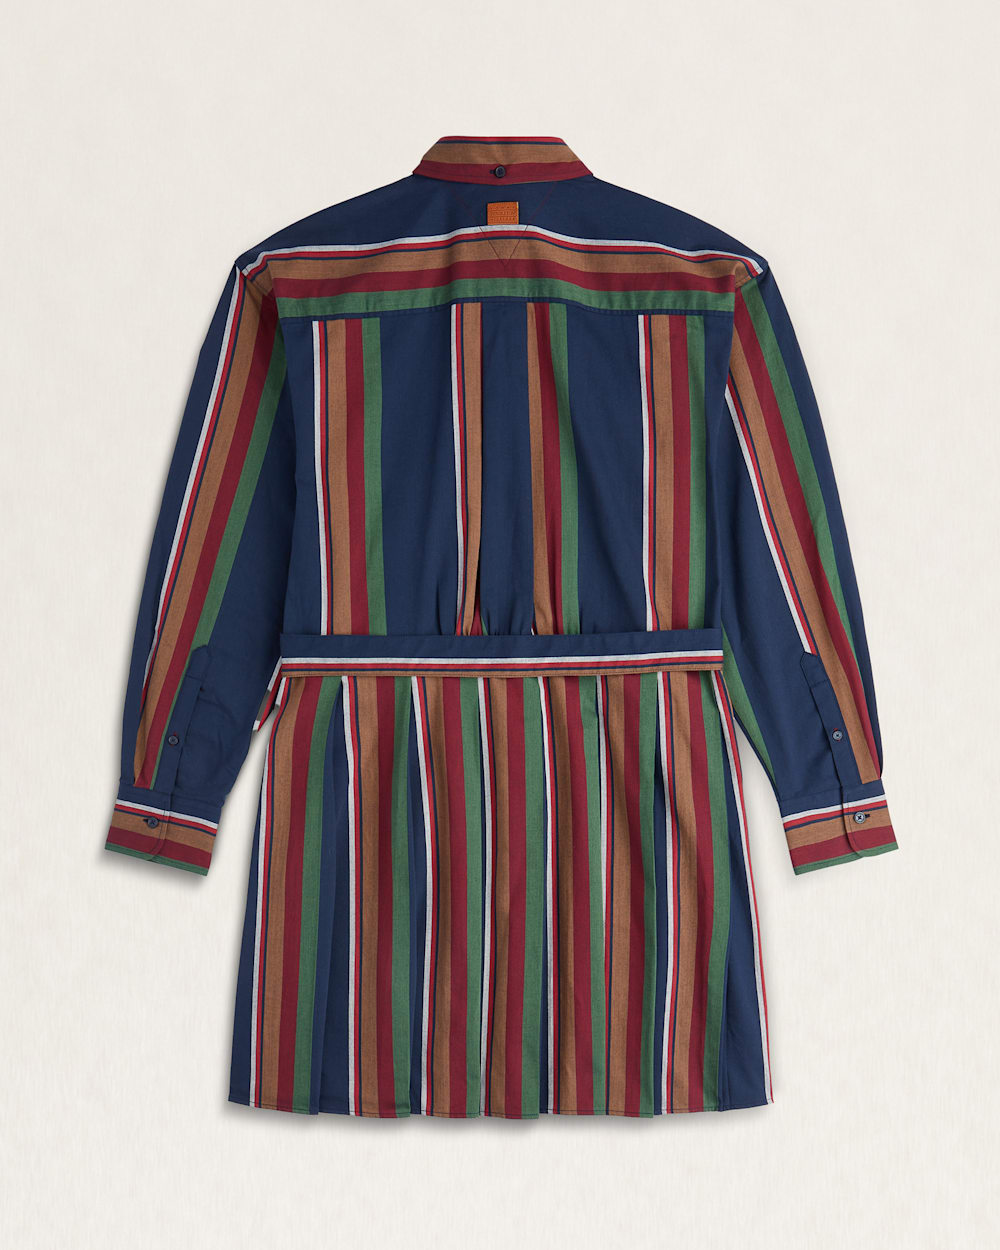 ALTERNATE VIEW OF TOMMY X PENDLETON PLEATED SHIRT DRESS IN NEW YORK STRIPE image number 2